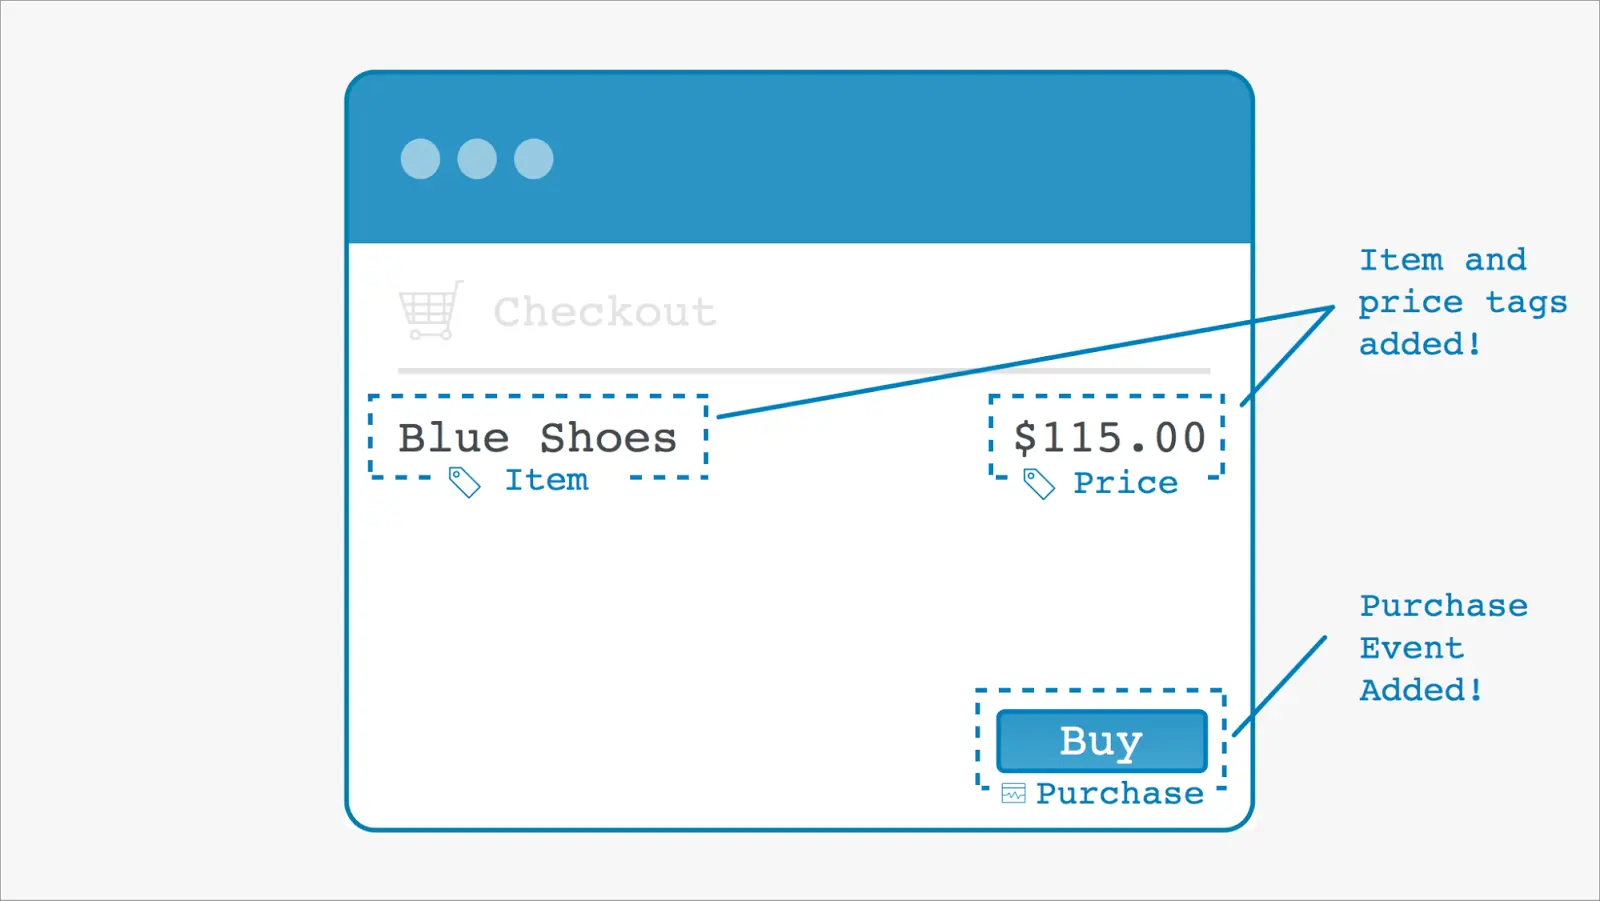 The “Item” and “Price” are tags that will be recorded with the “Purchase” event.